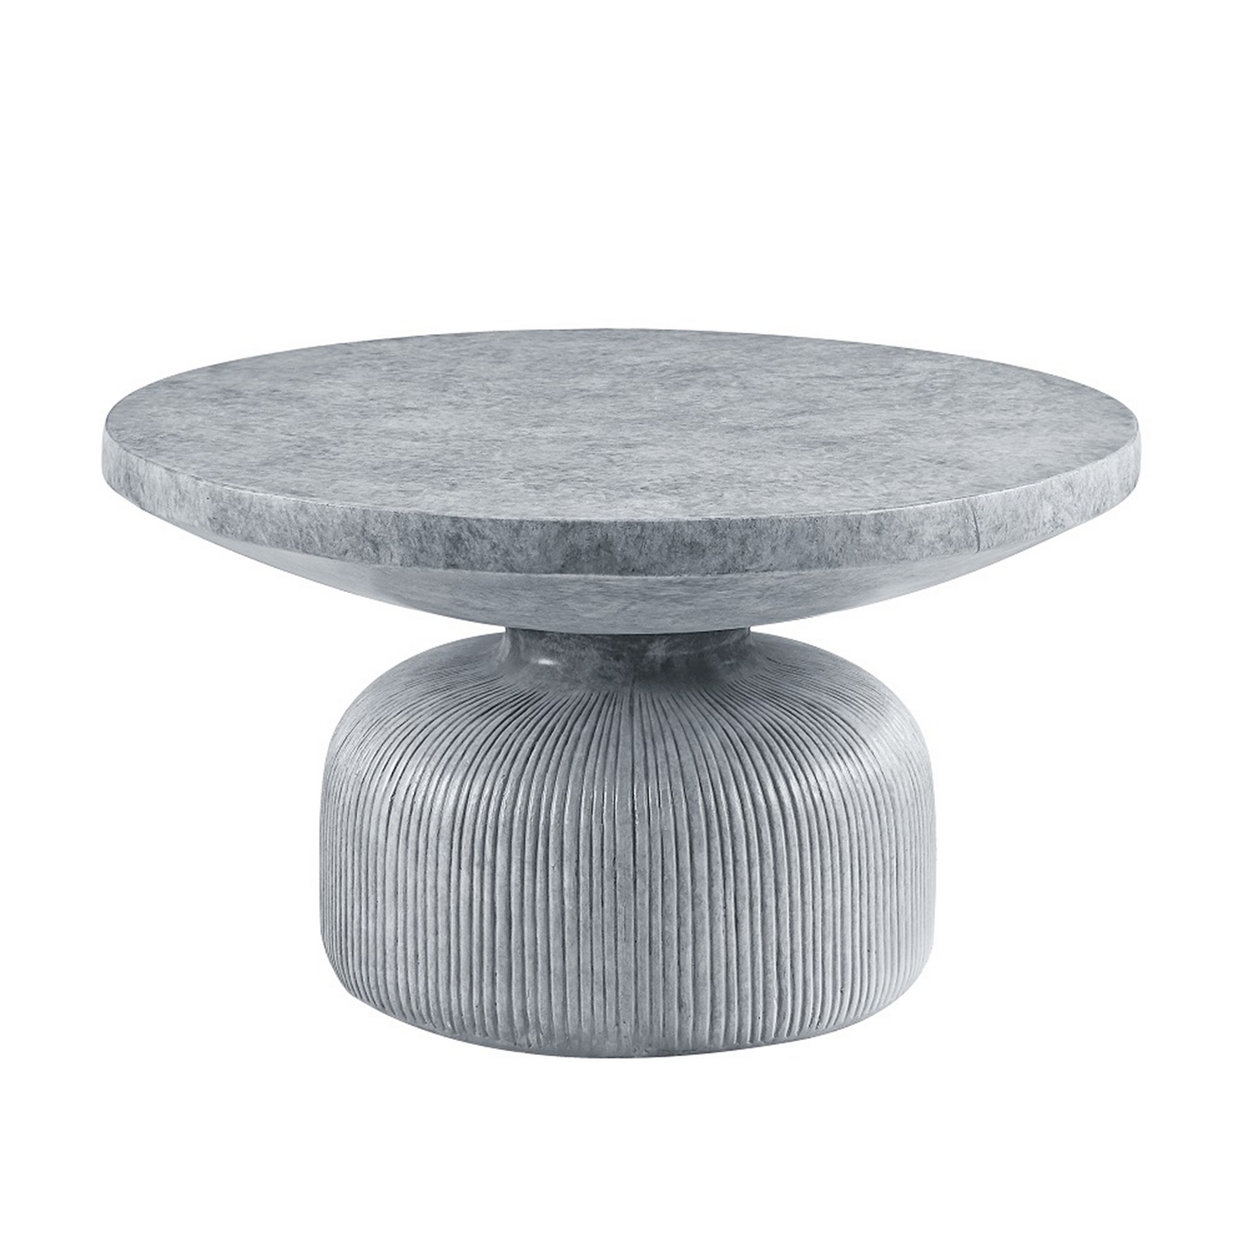 Lylie 30 Inch Coffee Table, Round Naturalistic Design, Gray Durable Cement - Saltoro Sherpi